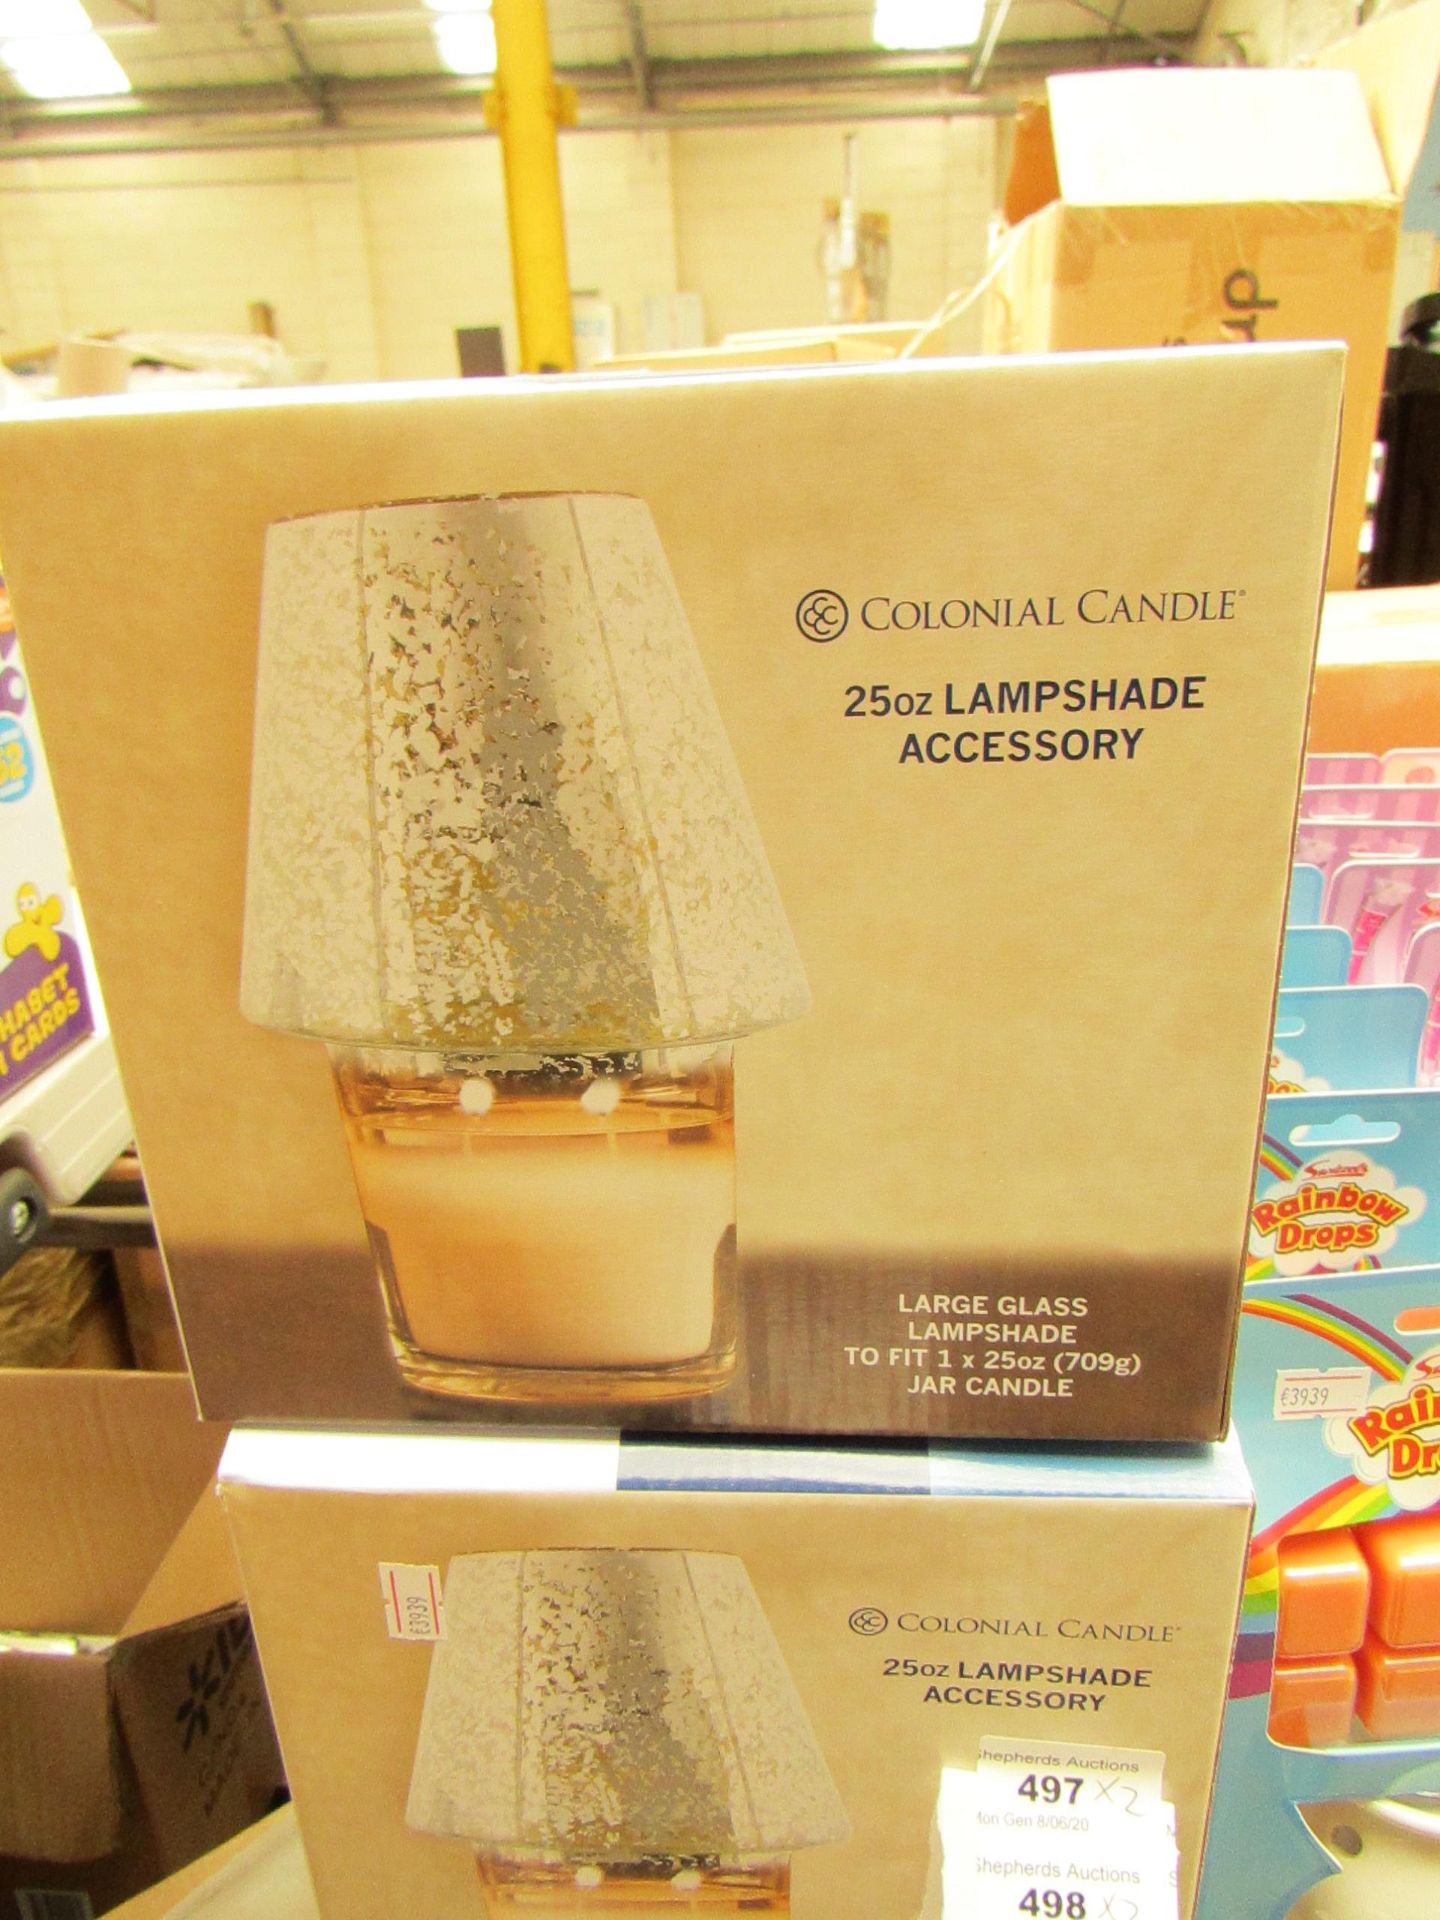 2 x Colonial Candle 25oz Lampshade Accessory For Candles. New & Boxed